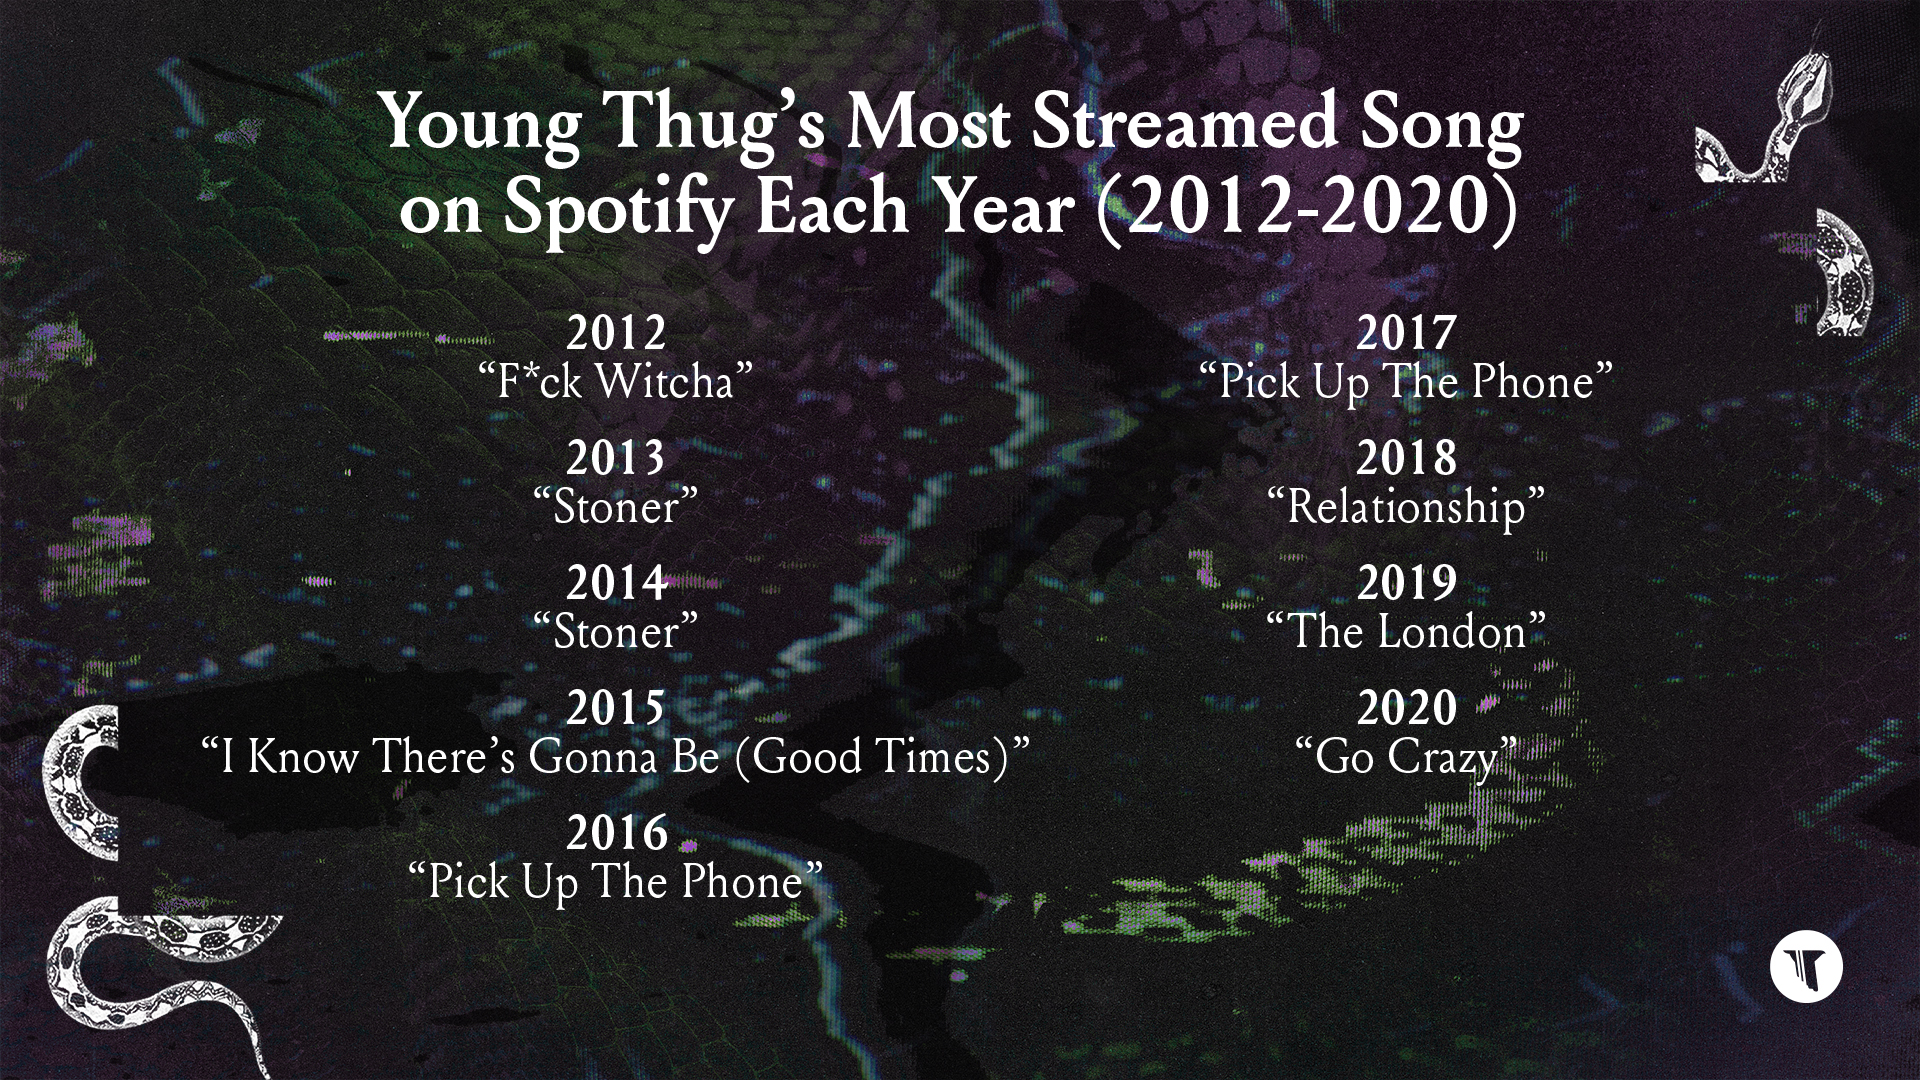 young thug most streamed song 2012-2020